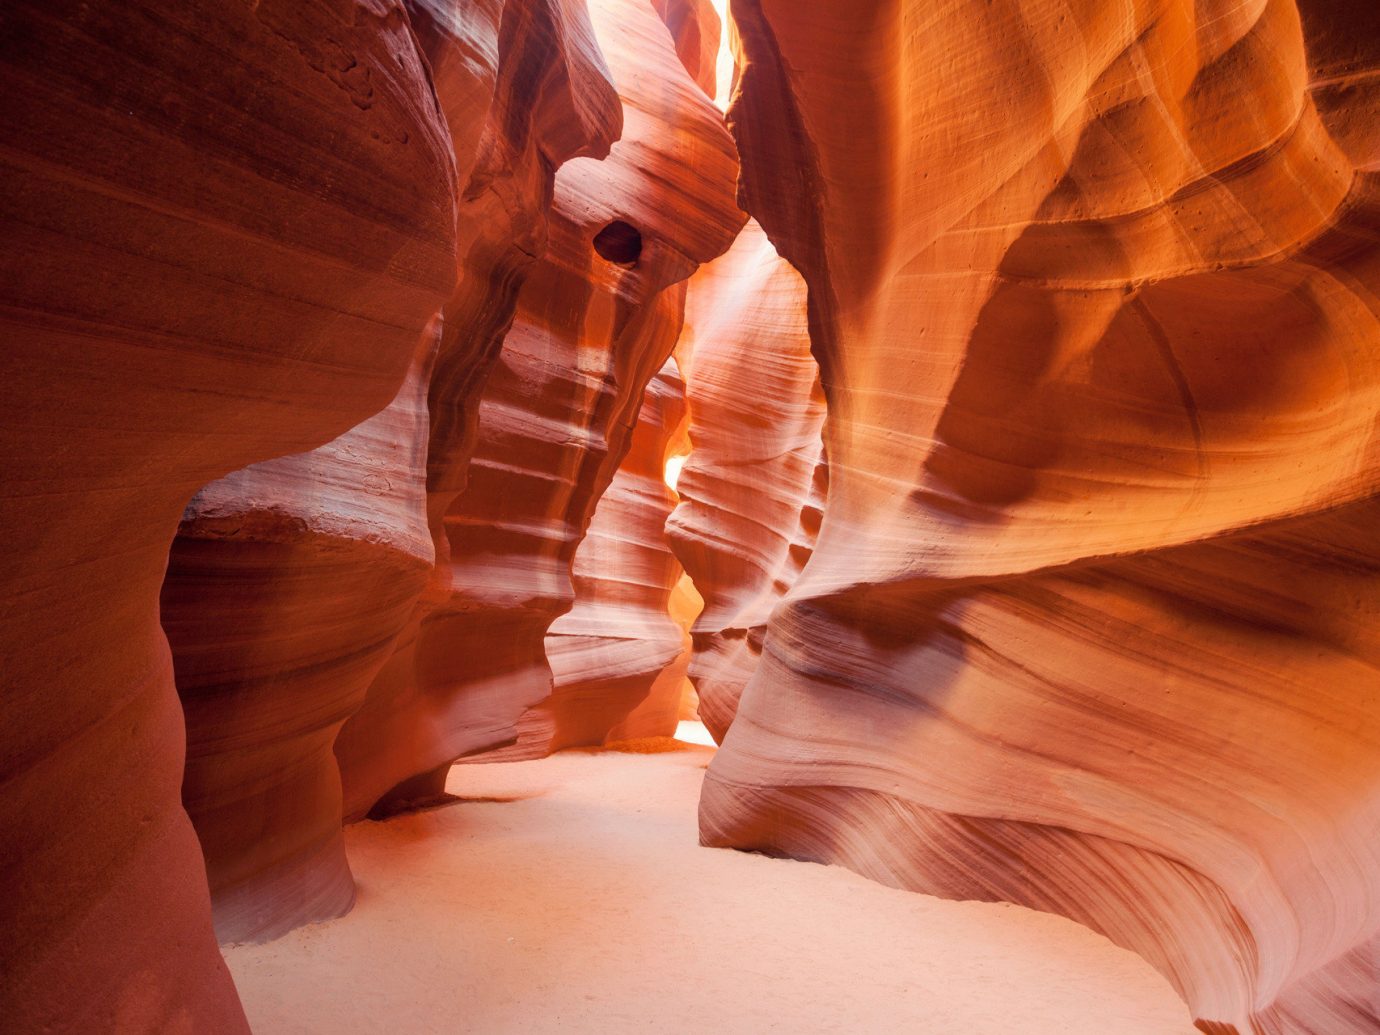 Natural wonders Offbeat Scenic views valley color canyon Nature red indoor person close up organ hand sunlight formation human body